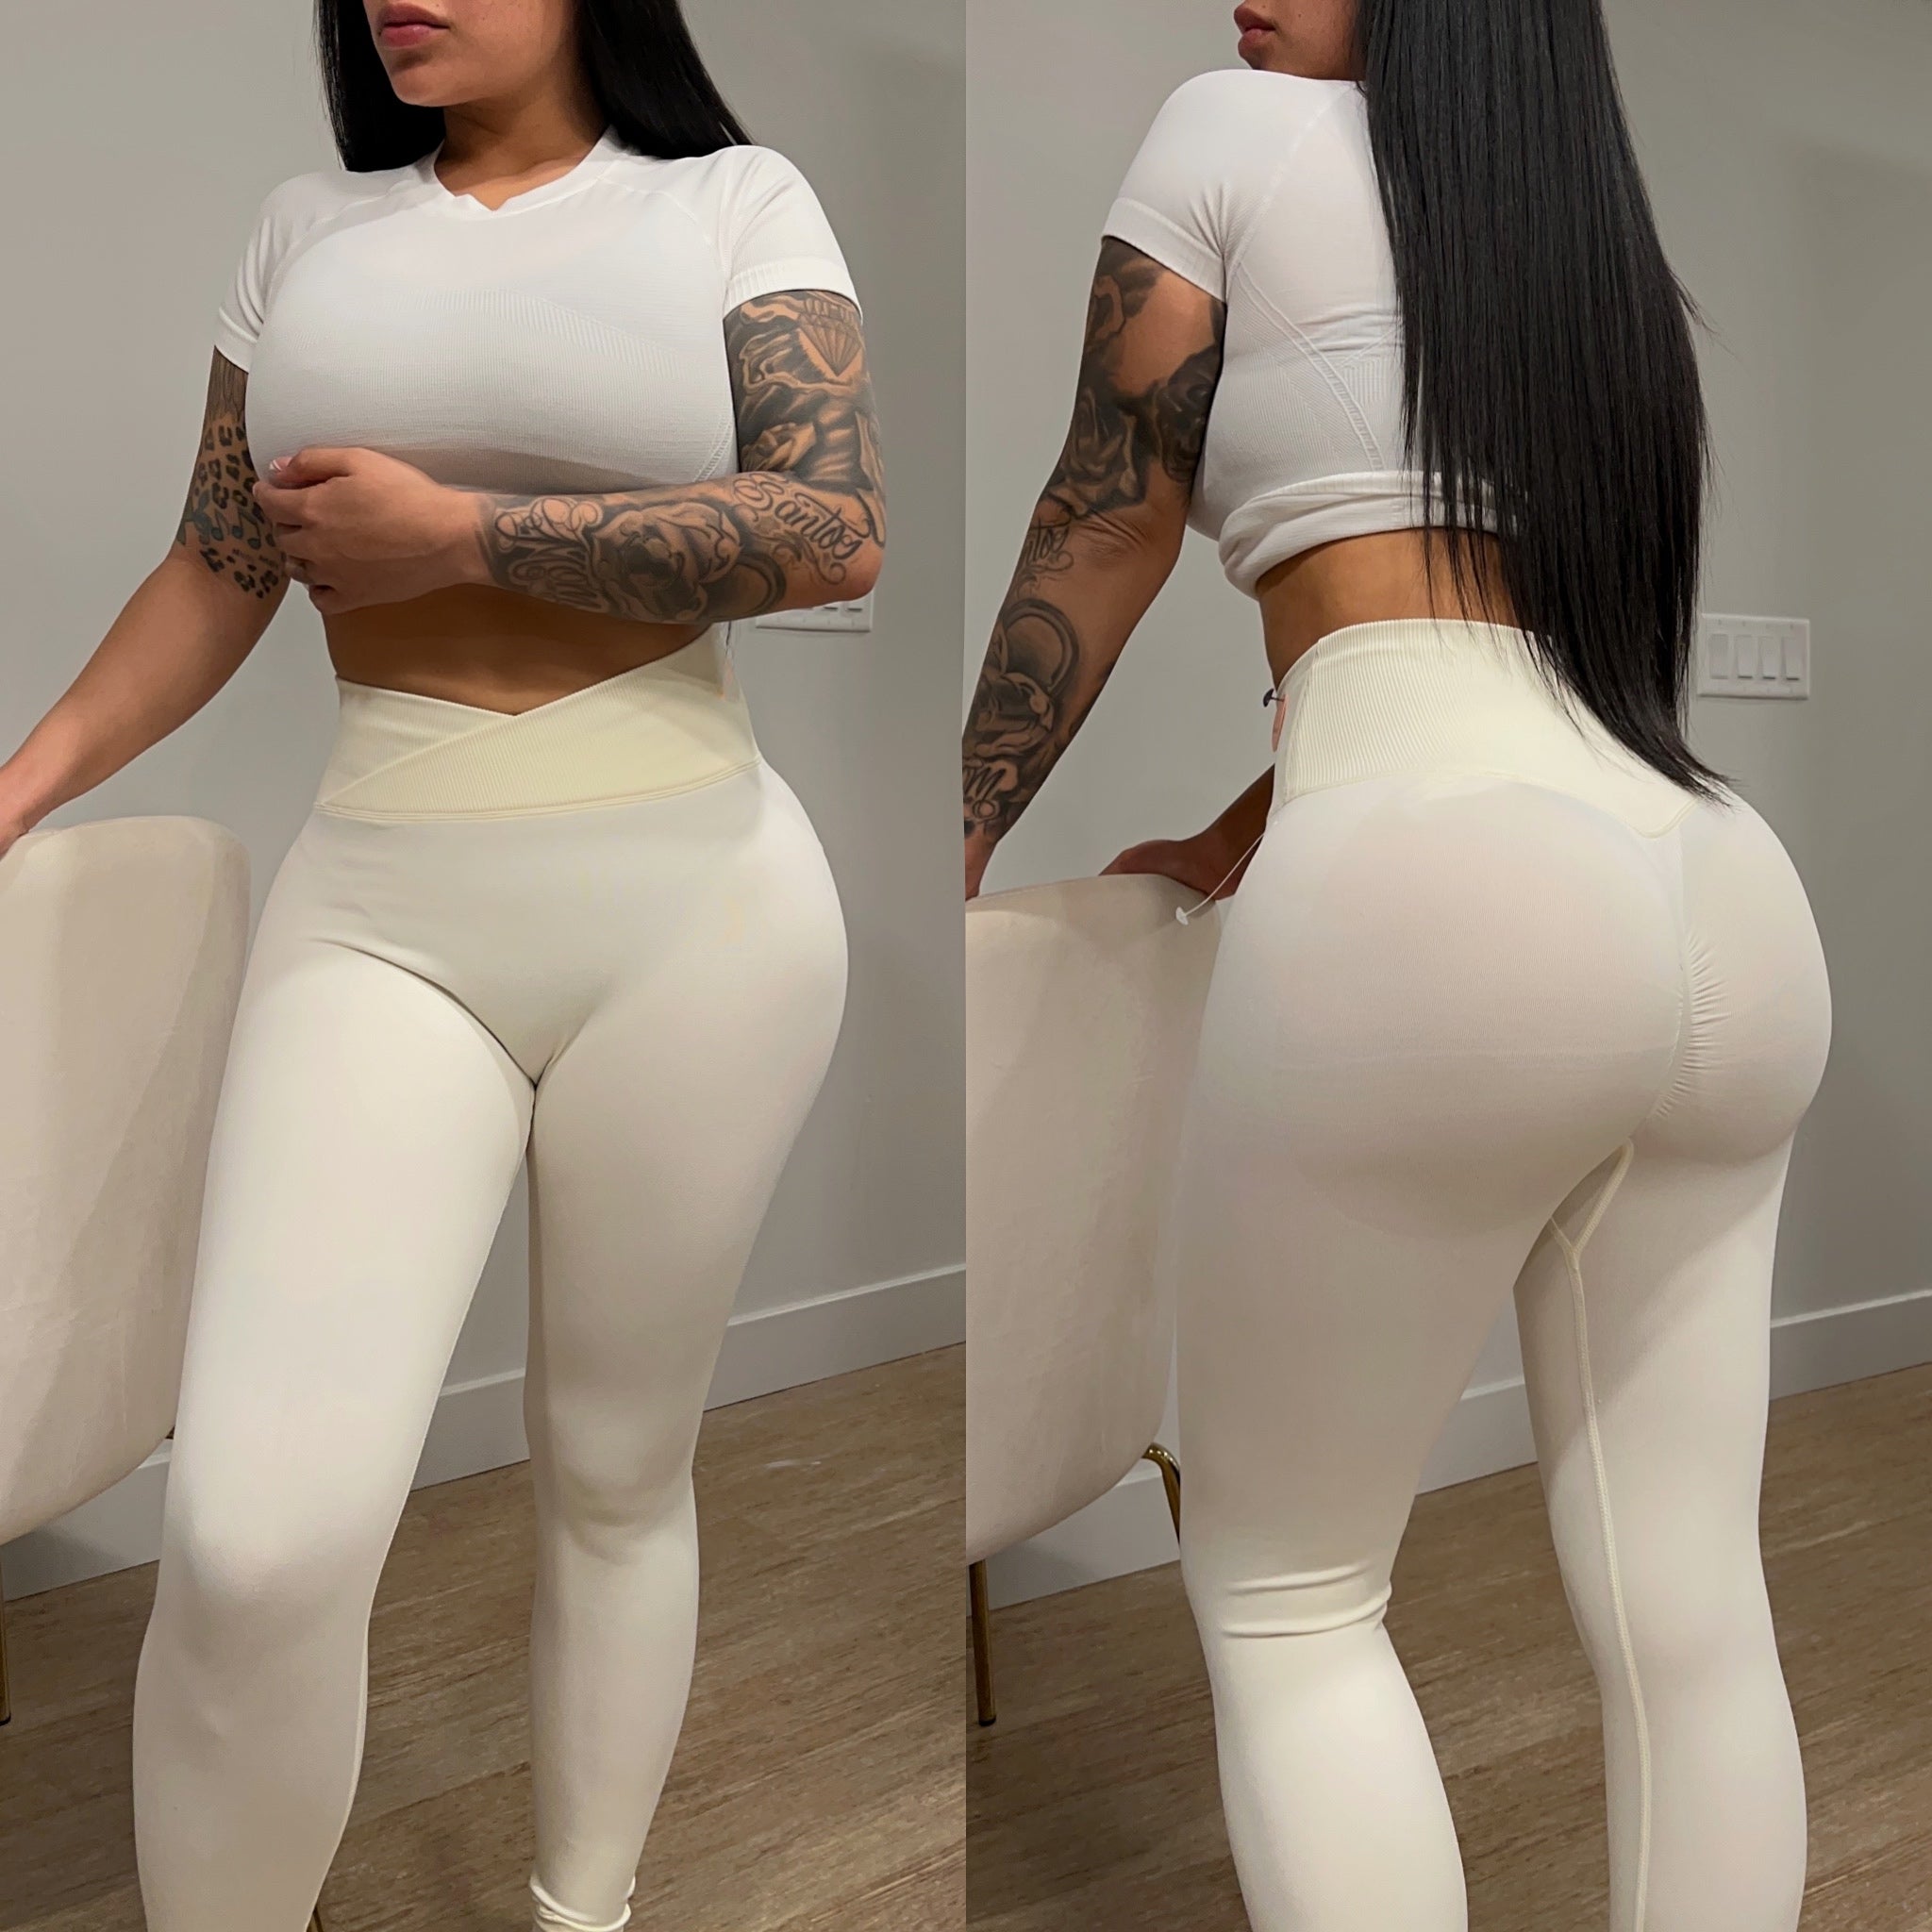 Printed V Cut Seamless Leggings For Women Fashionable Workout Pants And  Maternity Work Clothes From Drucillajohn, $13.45 | DHgate.Com